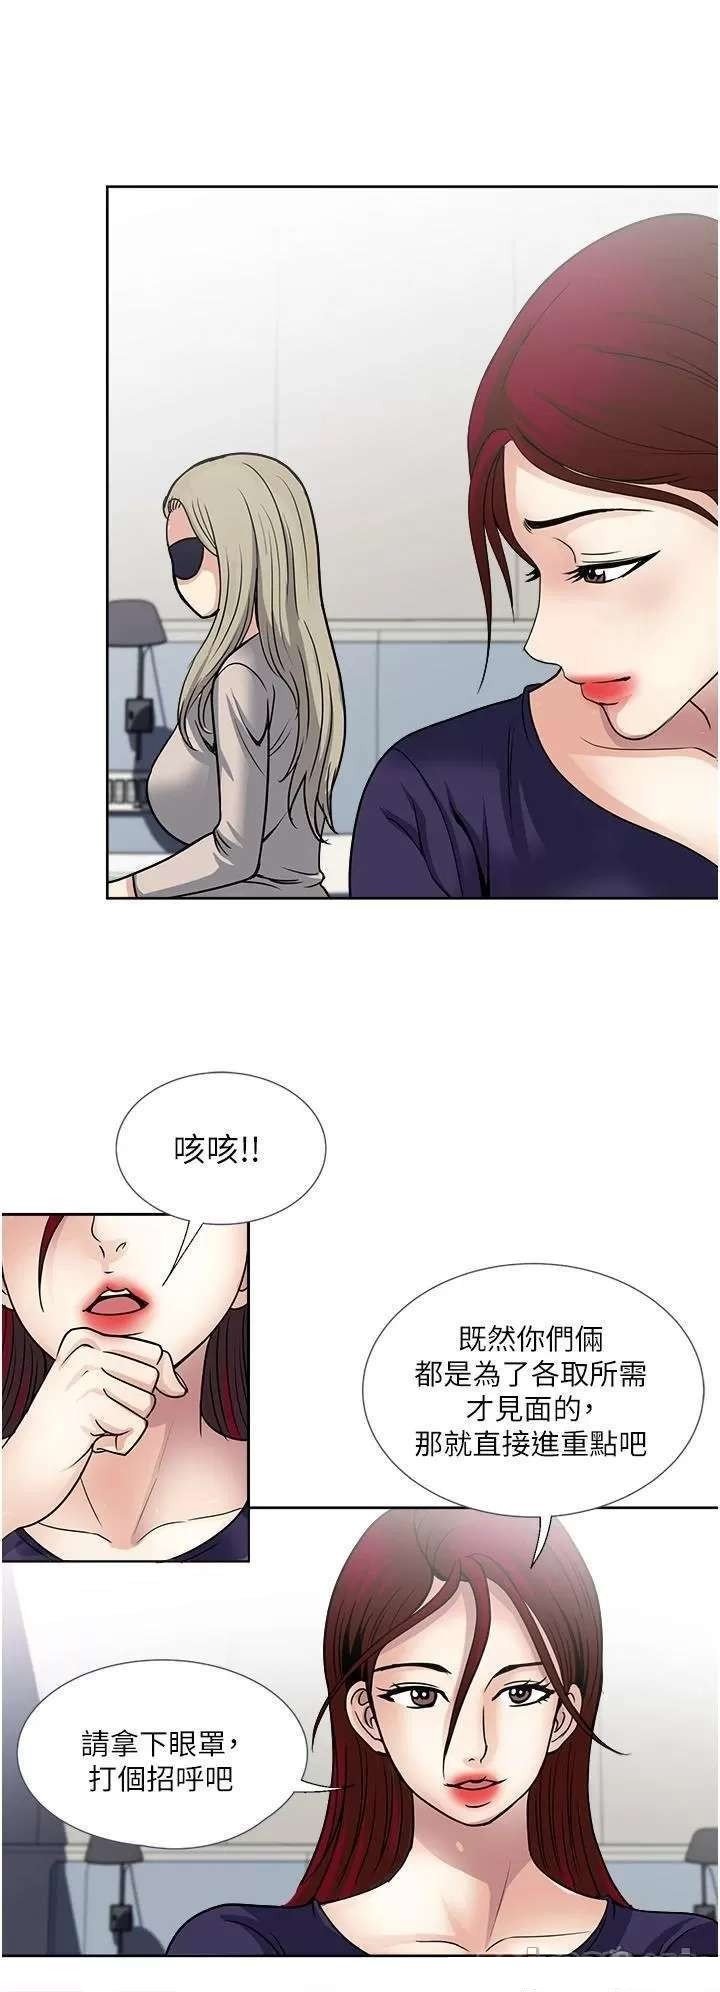 just-once-raw-chap-39-27